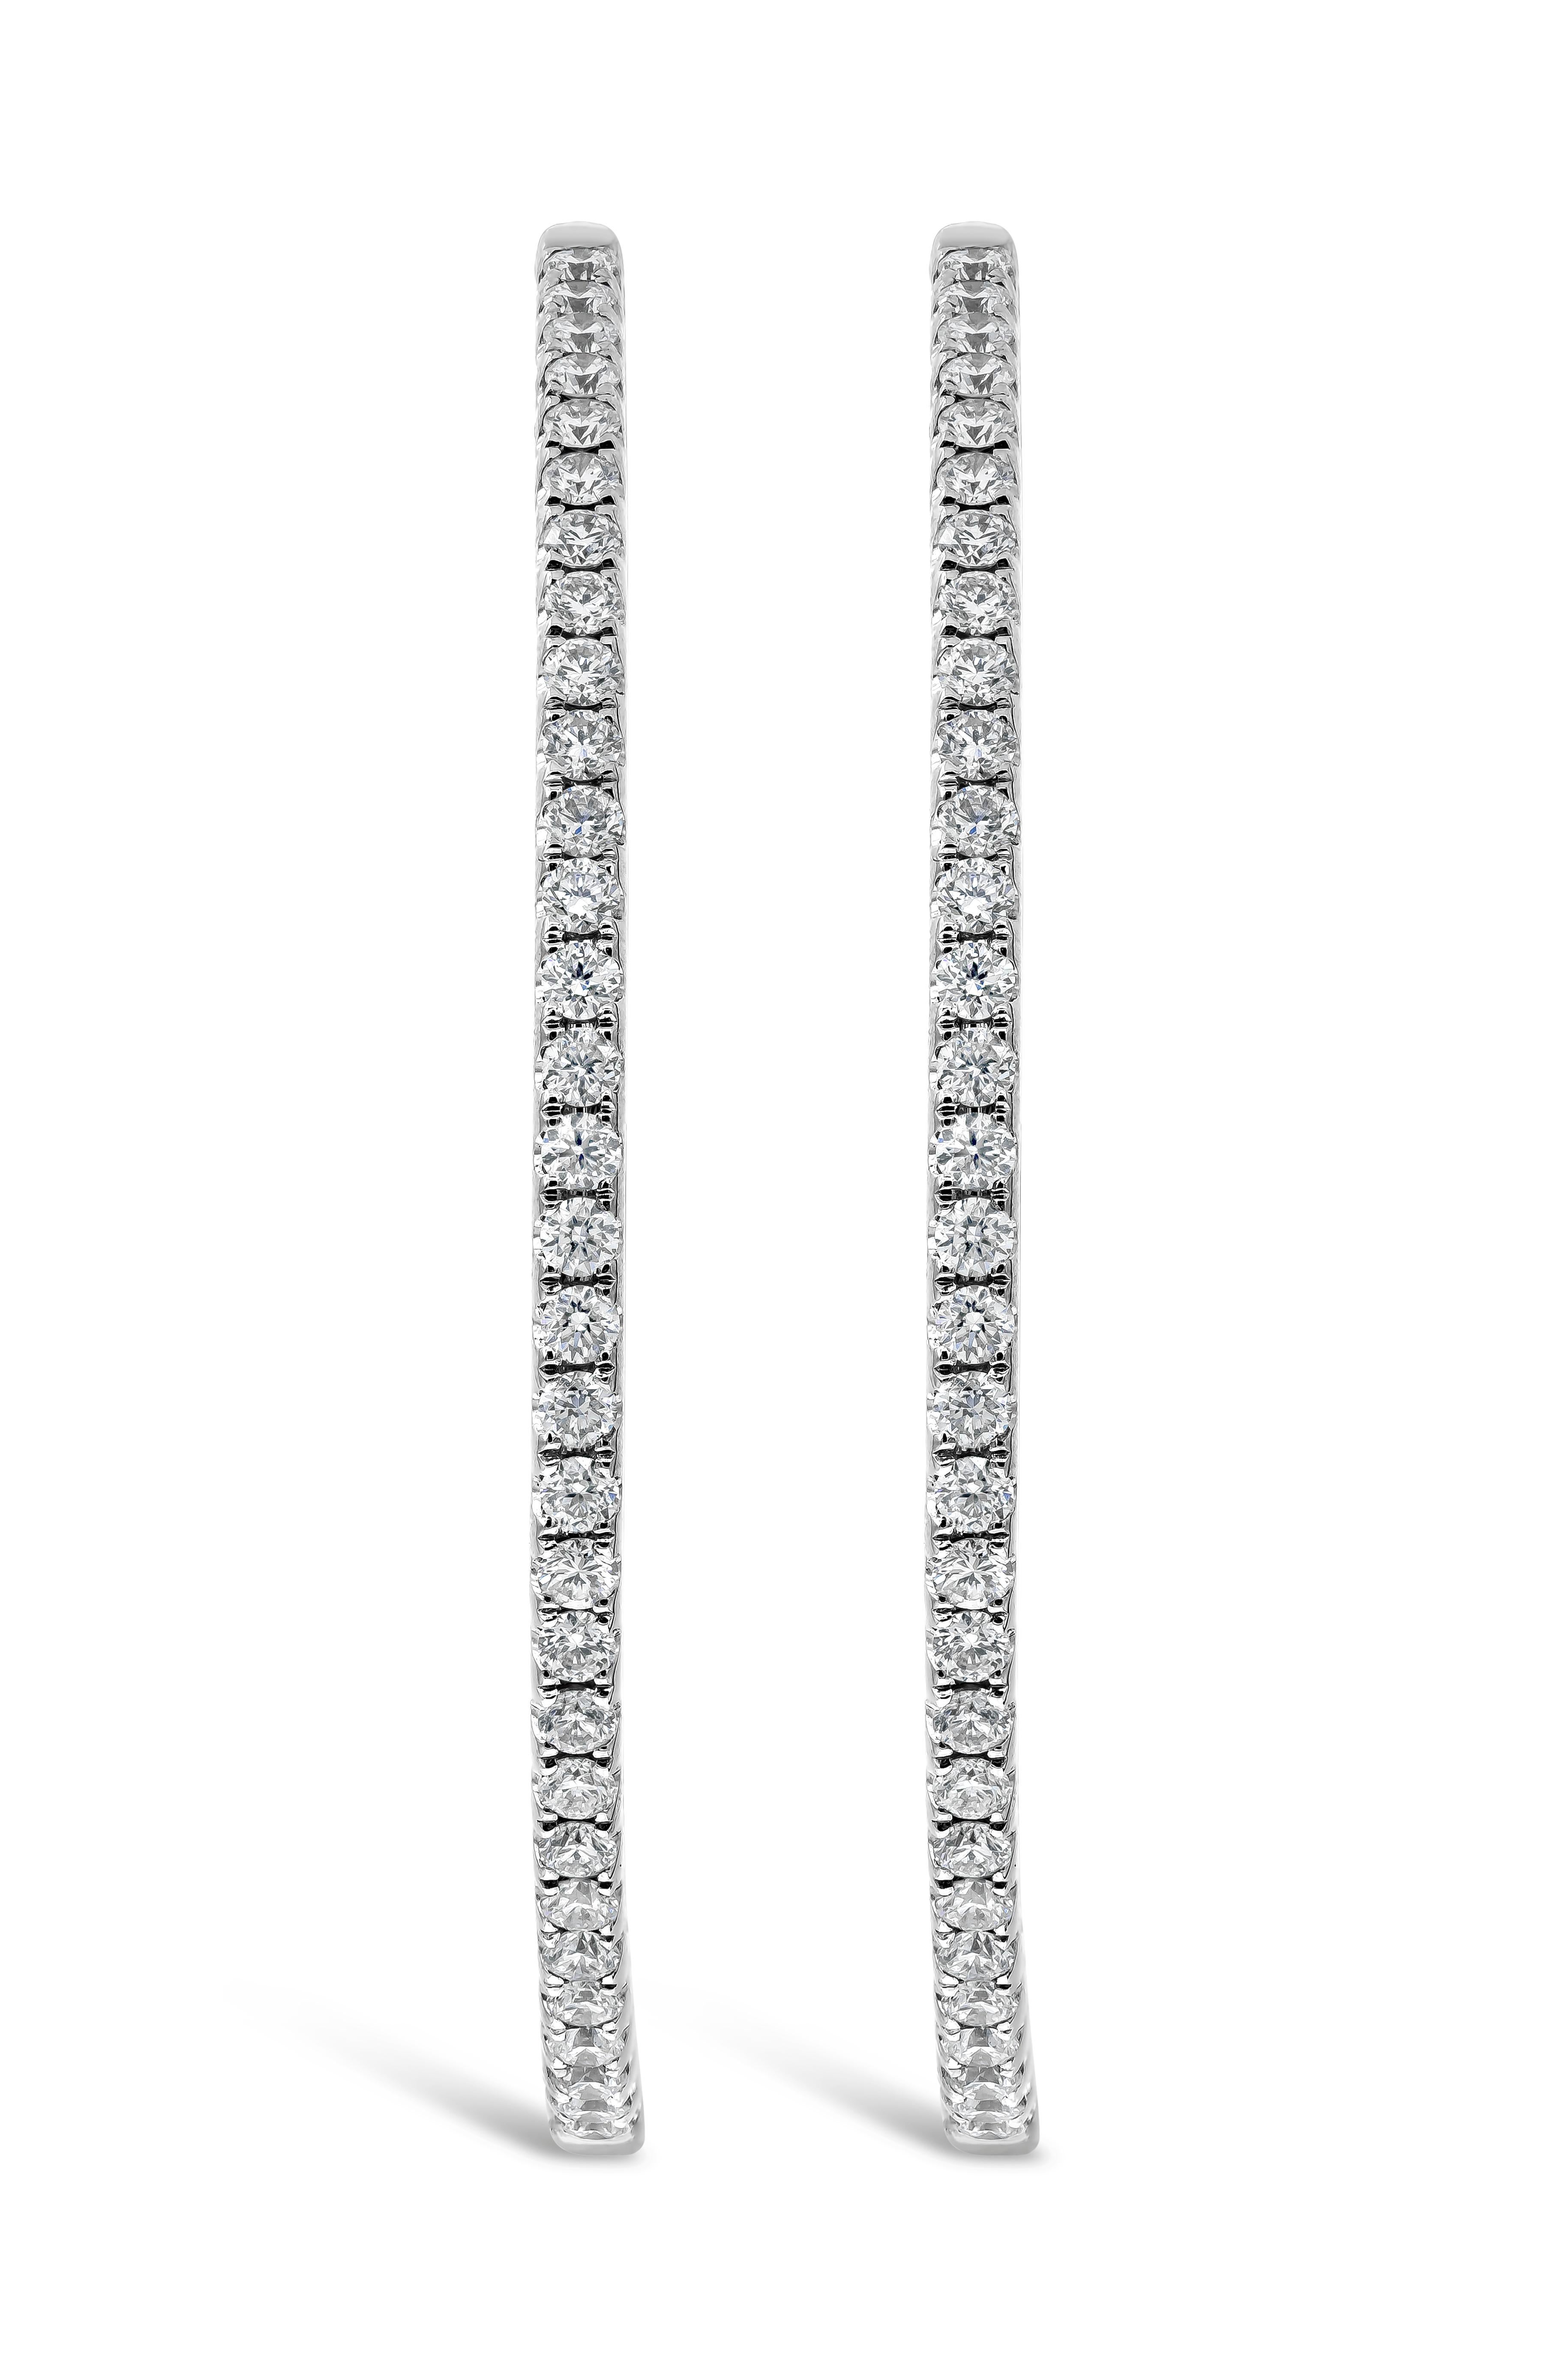 A timeless piece of jewelry showcasing a row of 110 round brilliant diamonds set in a classic hoop style made in 18k white gold. Diamonds weigh 1.52 carats total. 1.50 inches in diameter.

Roman Malakov is a custom house, specializing in creating